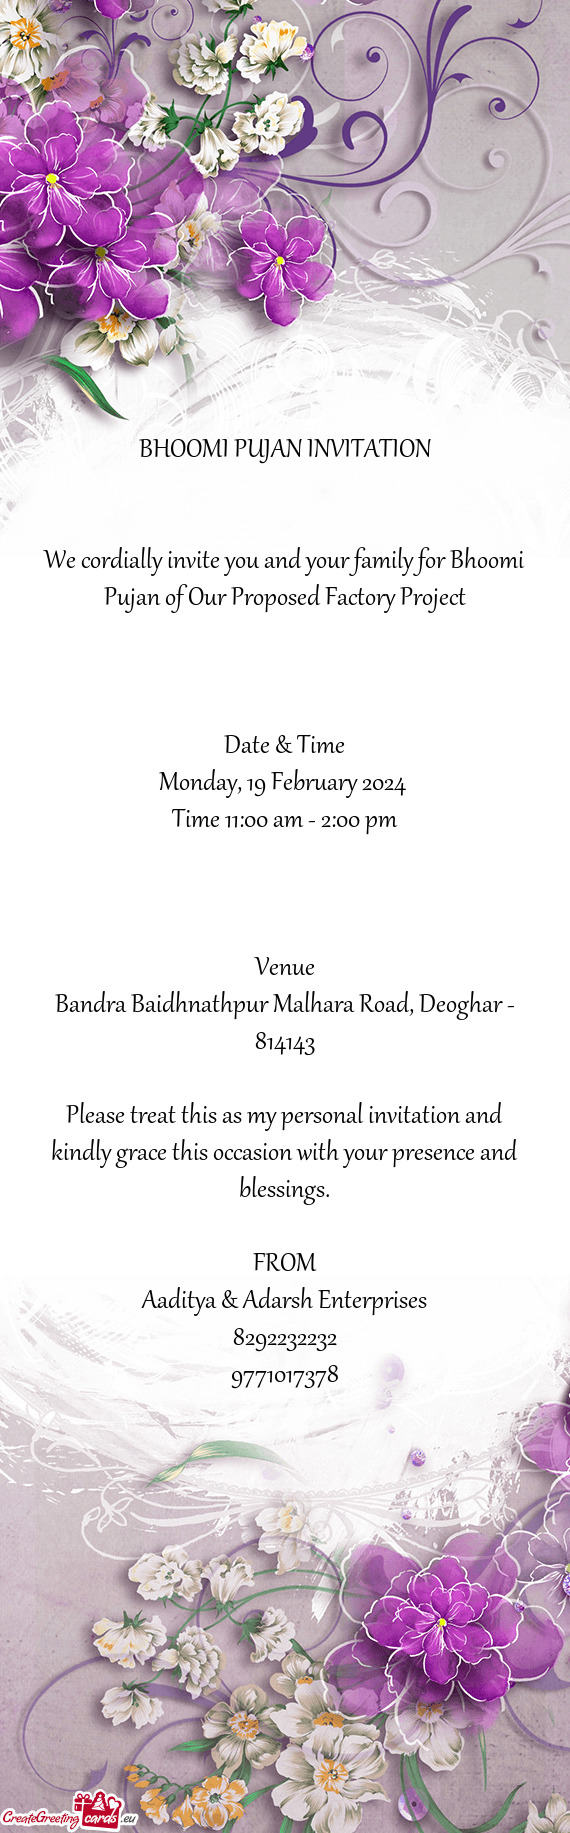 We cordially invite you and your family for Bhoomi Pujan of Our Proposed Factory Project